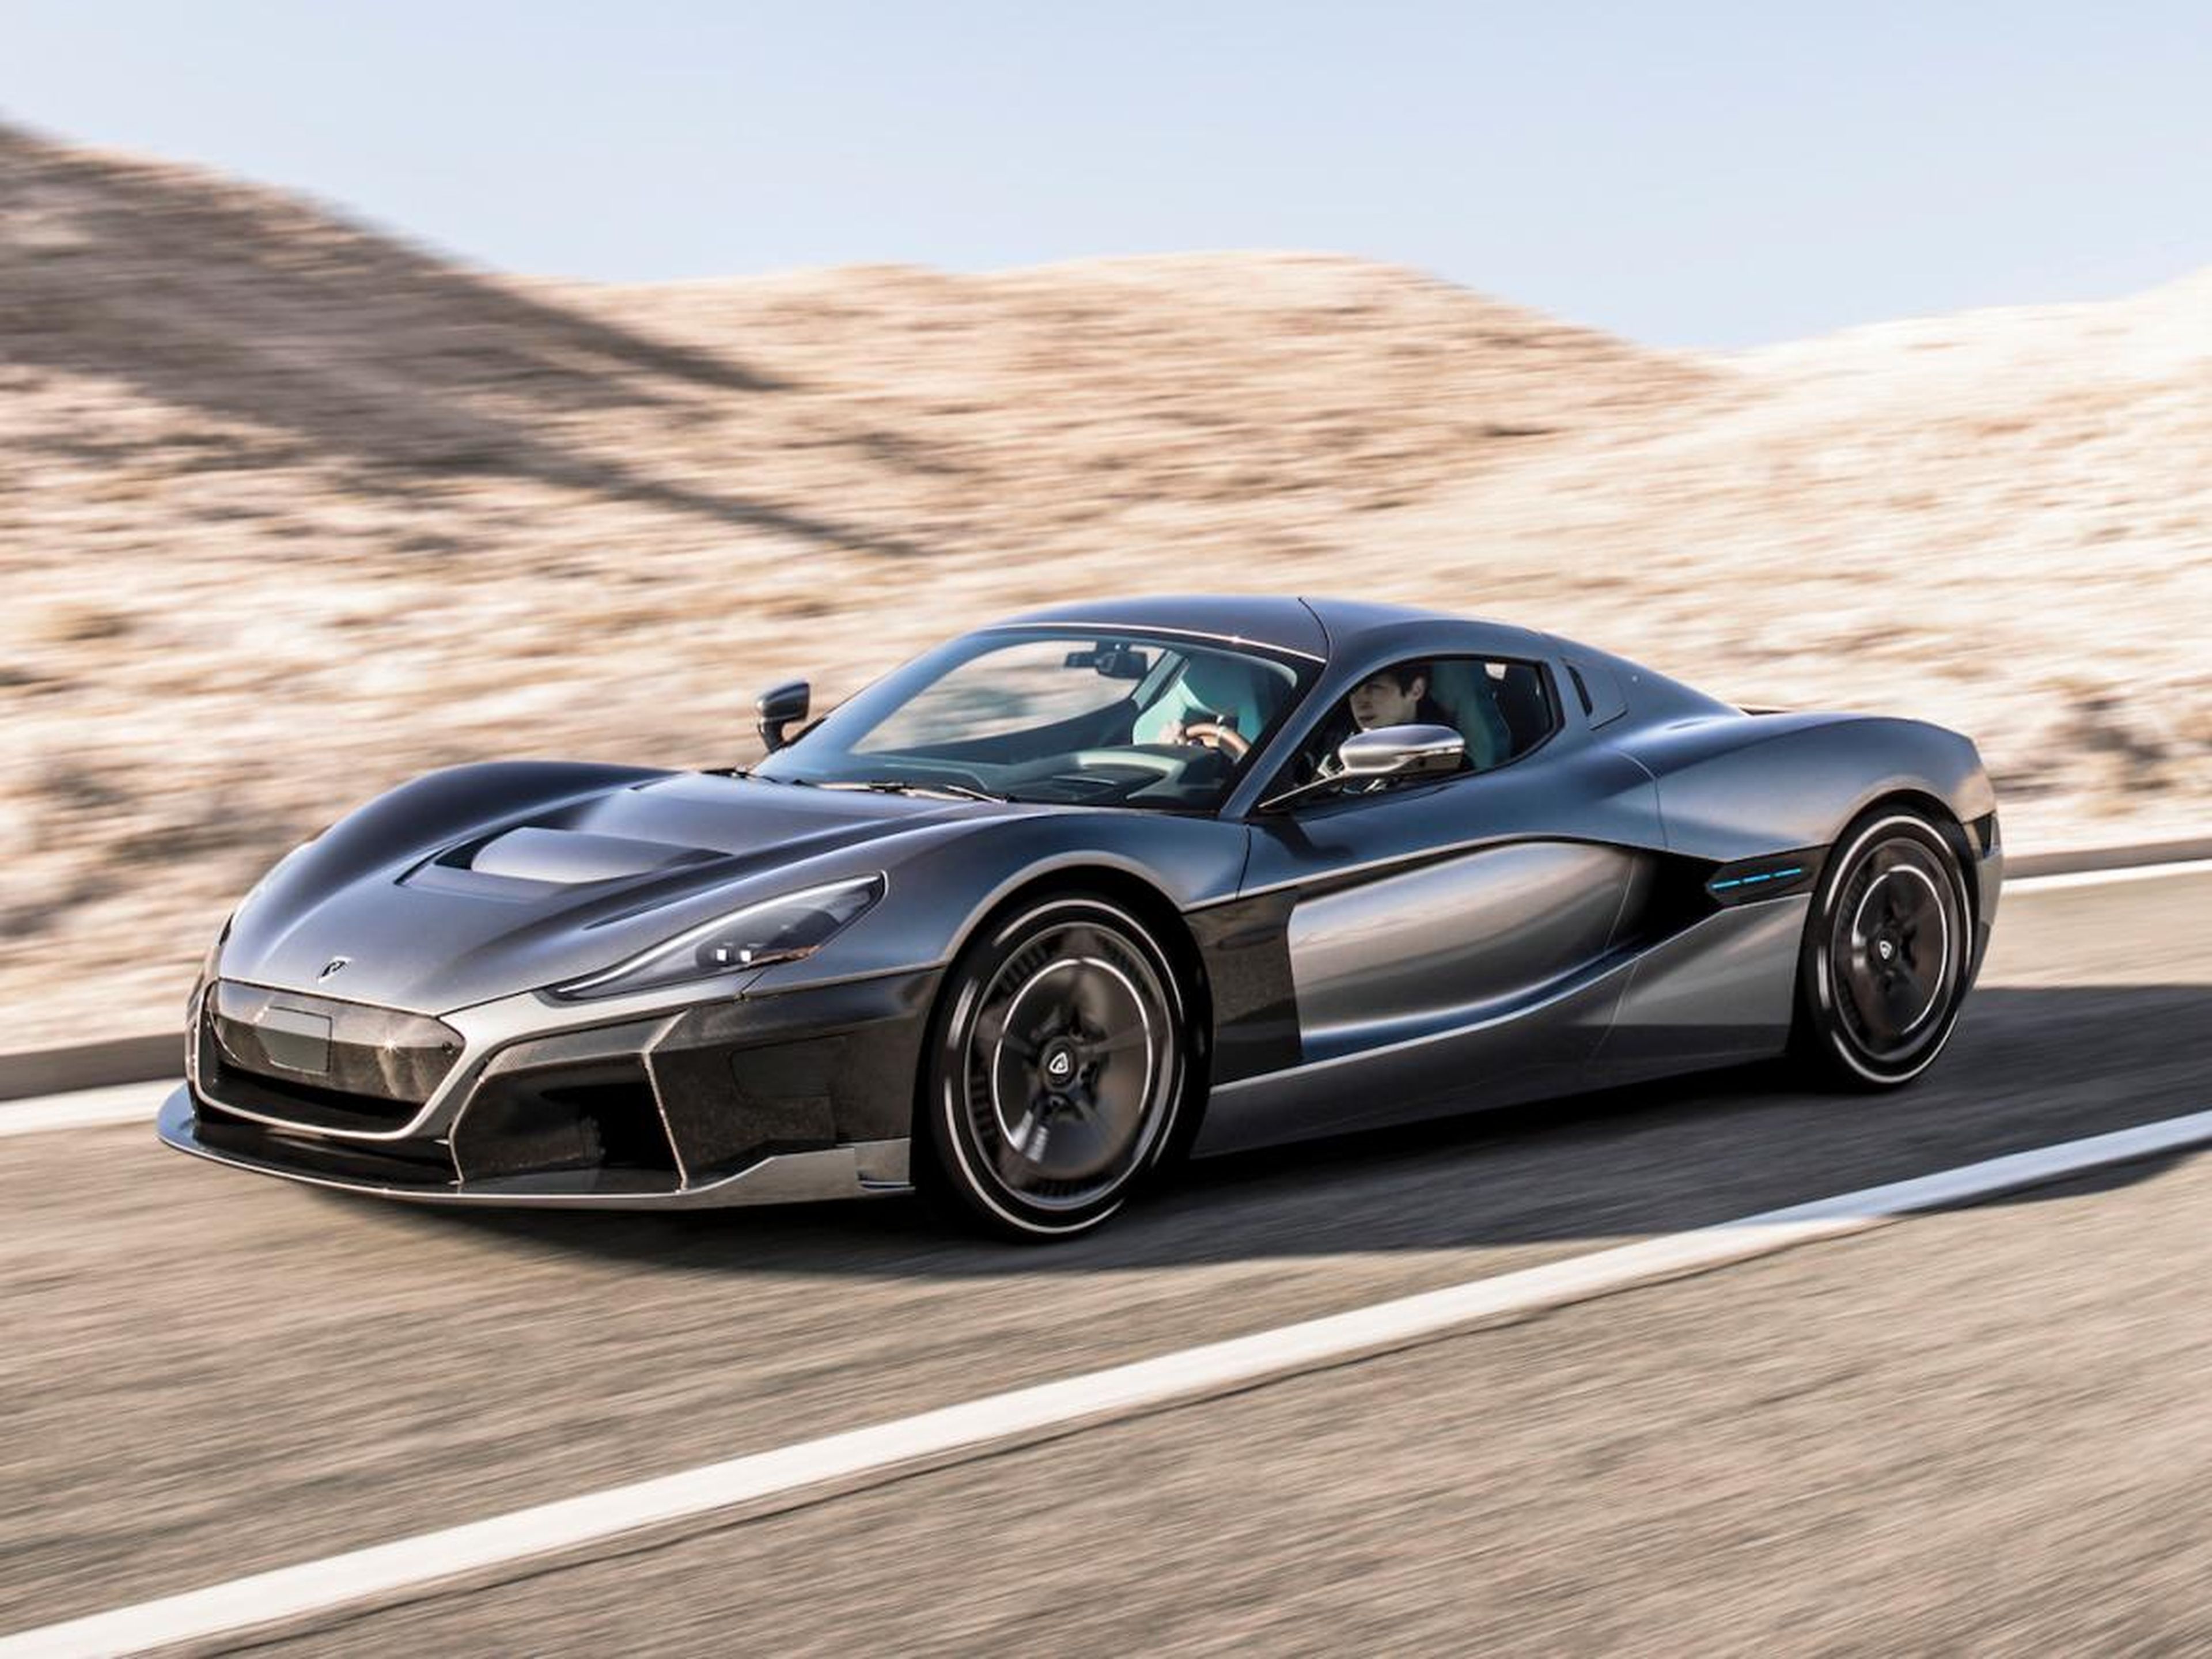 Rimac will start producing its C_Two supercar in 2020.